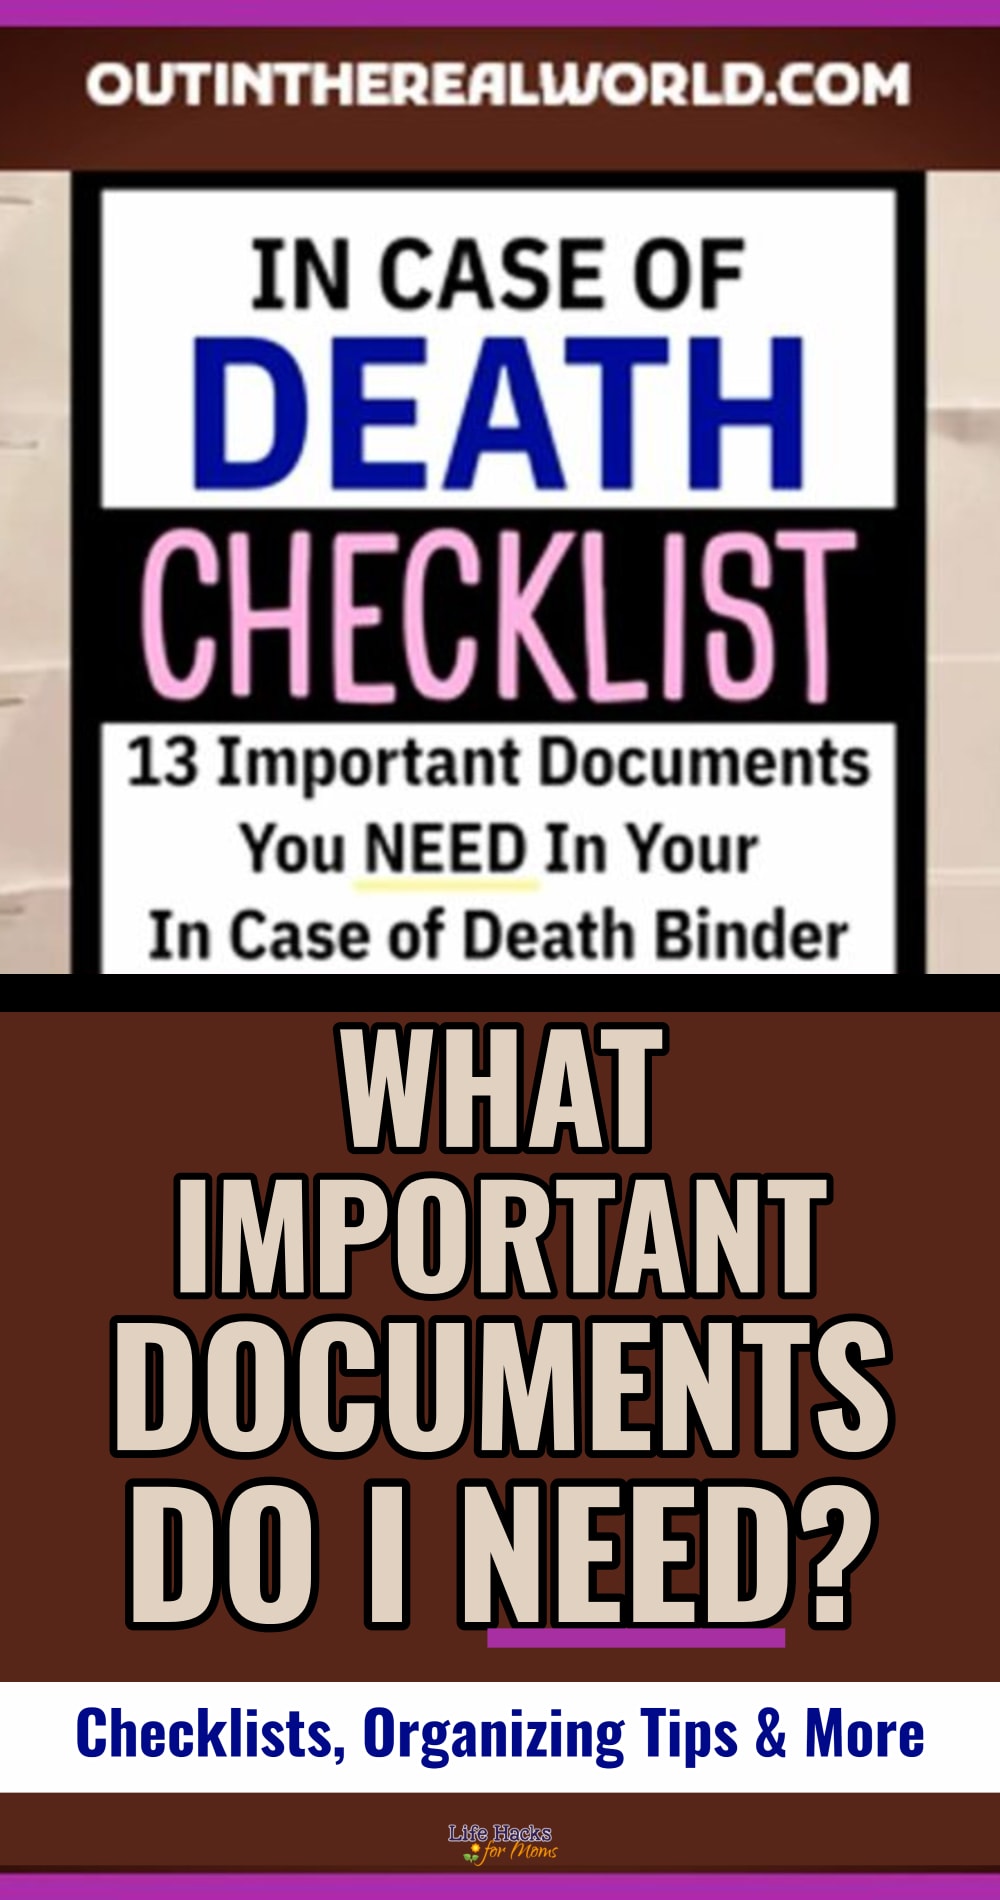 binder organization ideas and checklists for a family life binder, household binder or in case of death binder